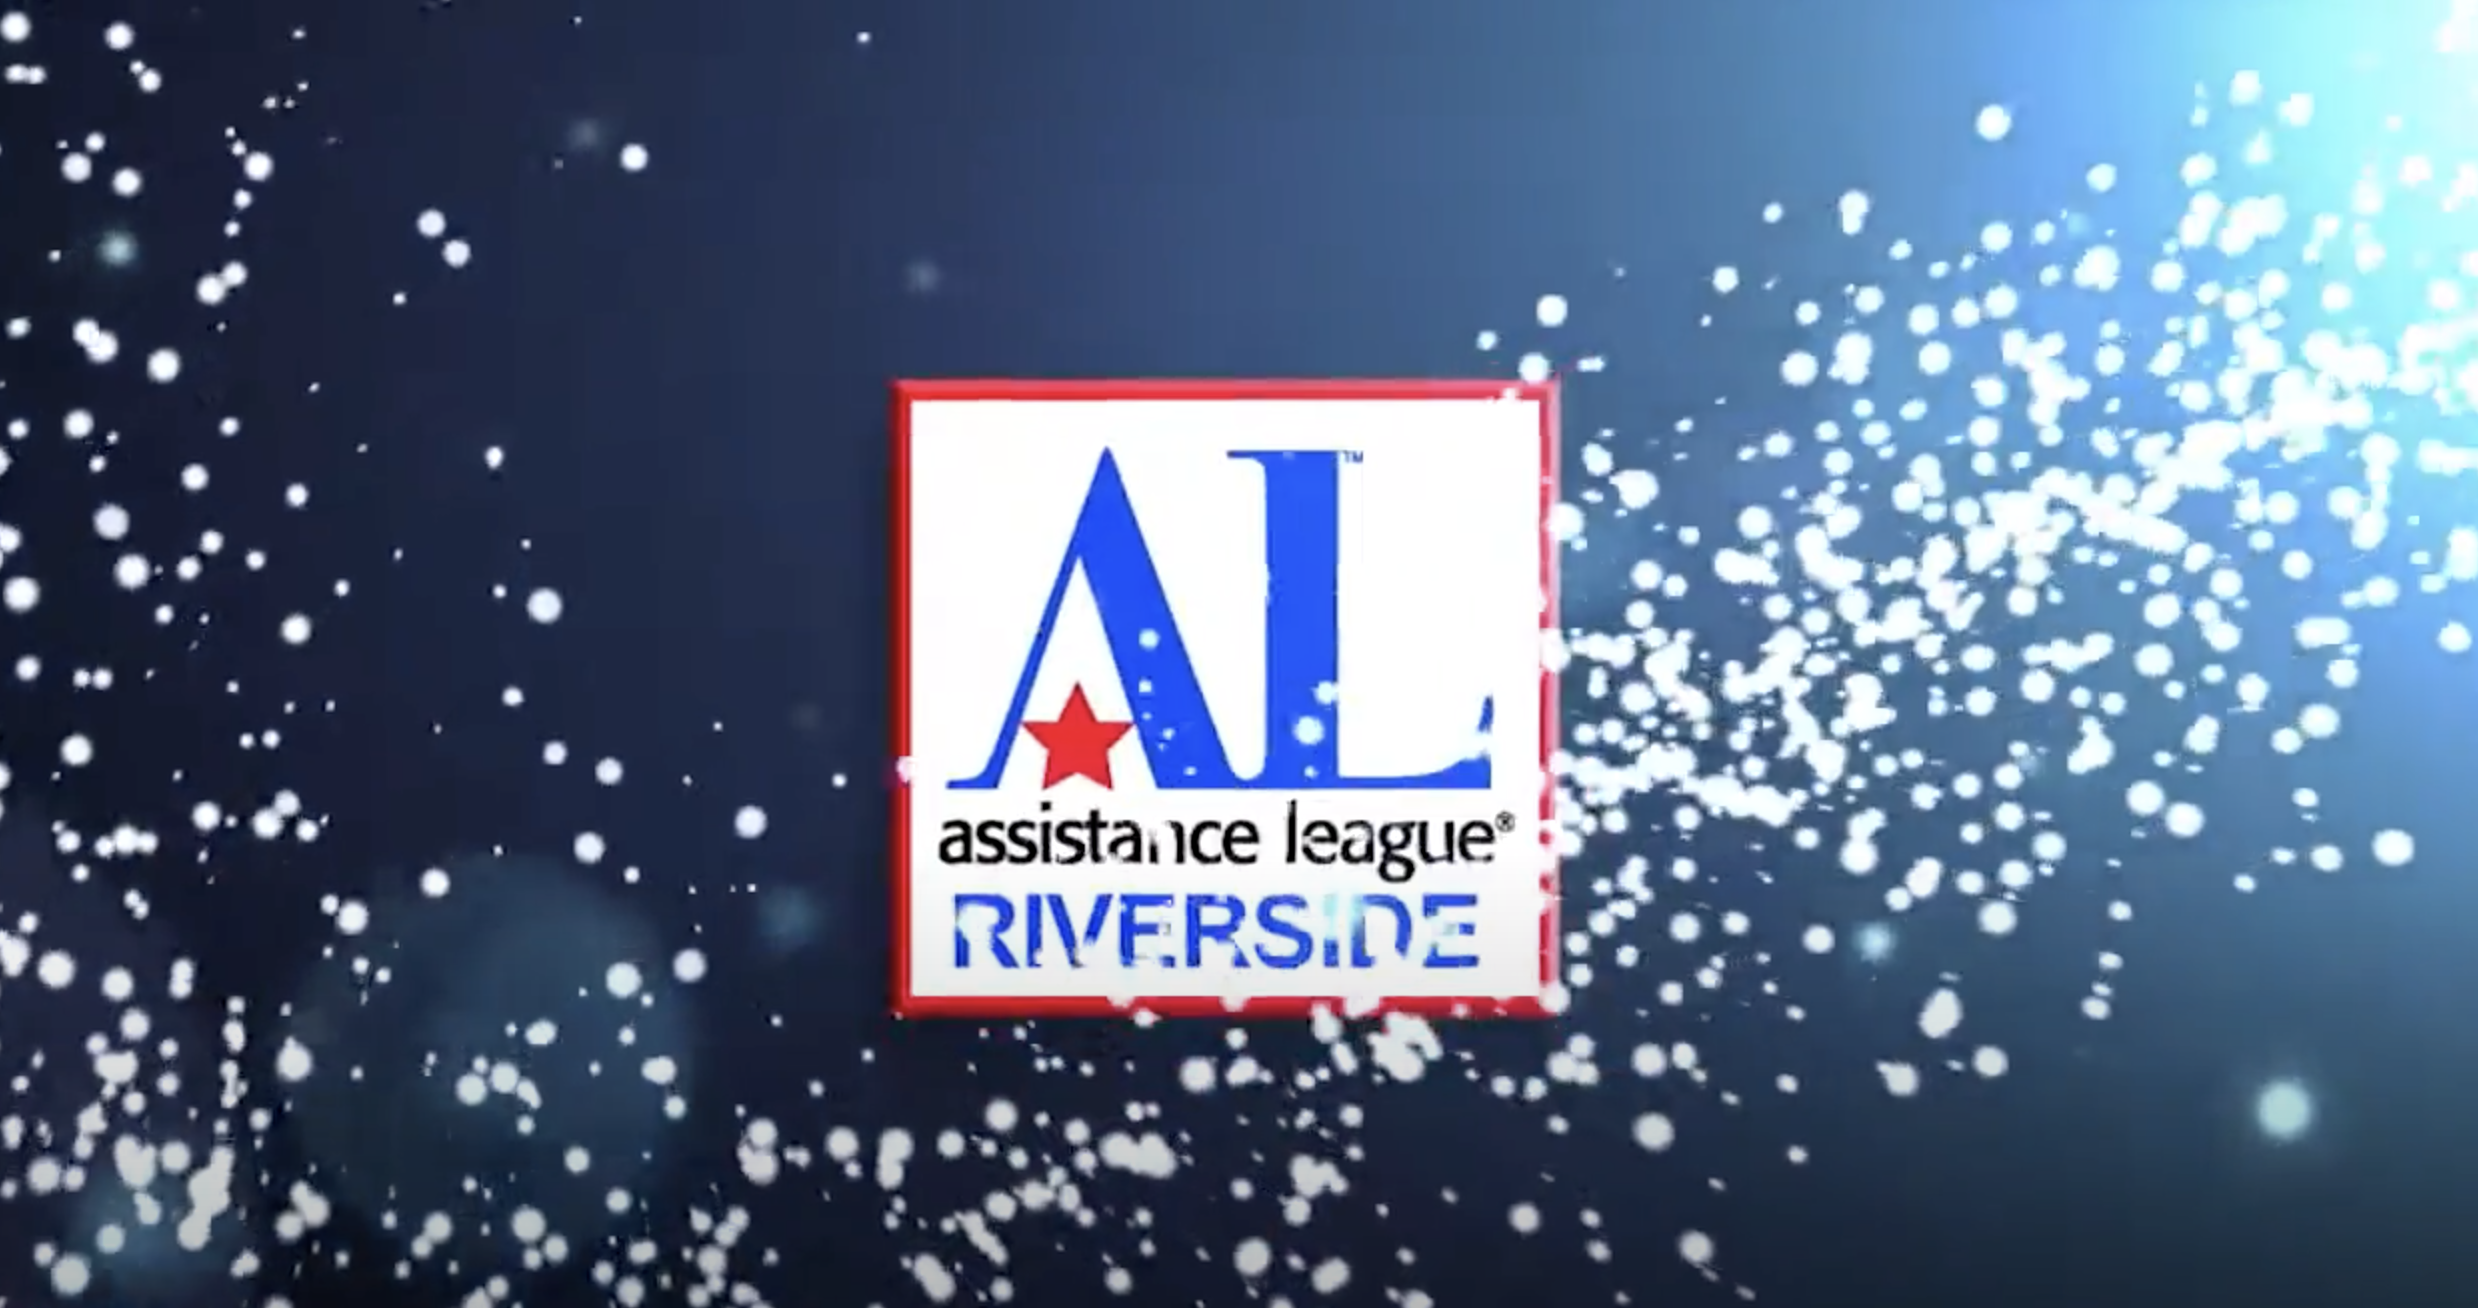 Graphic logo for the Assistance League of Riverside